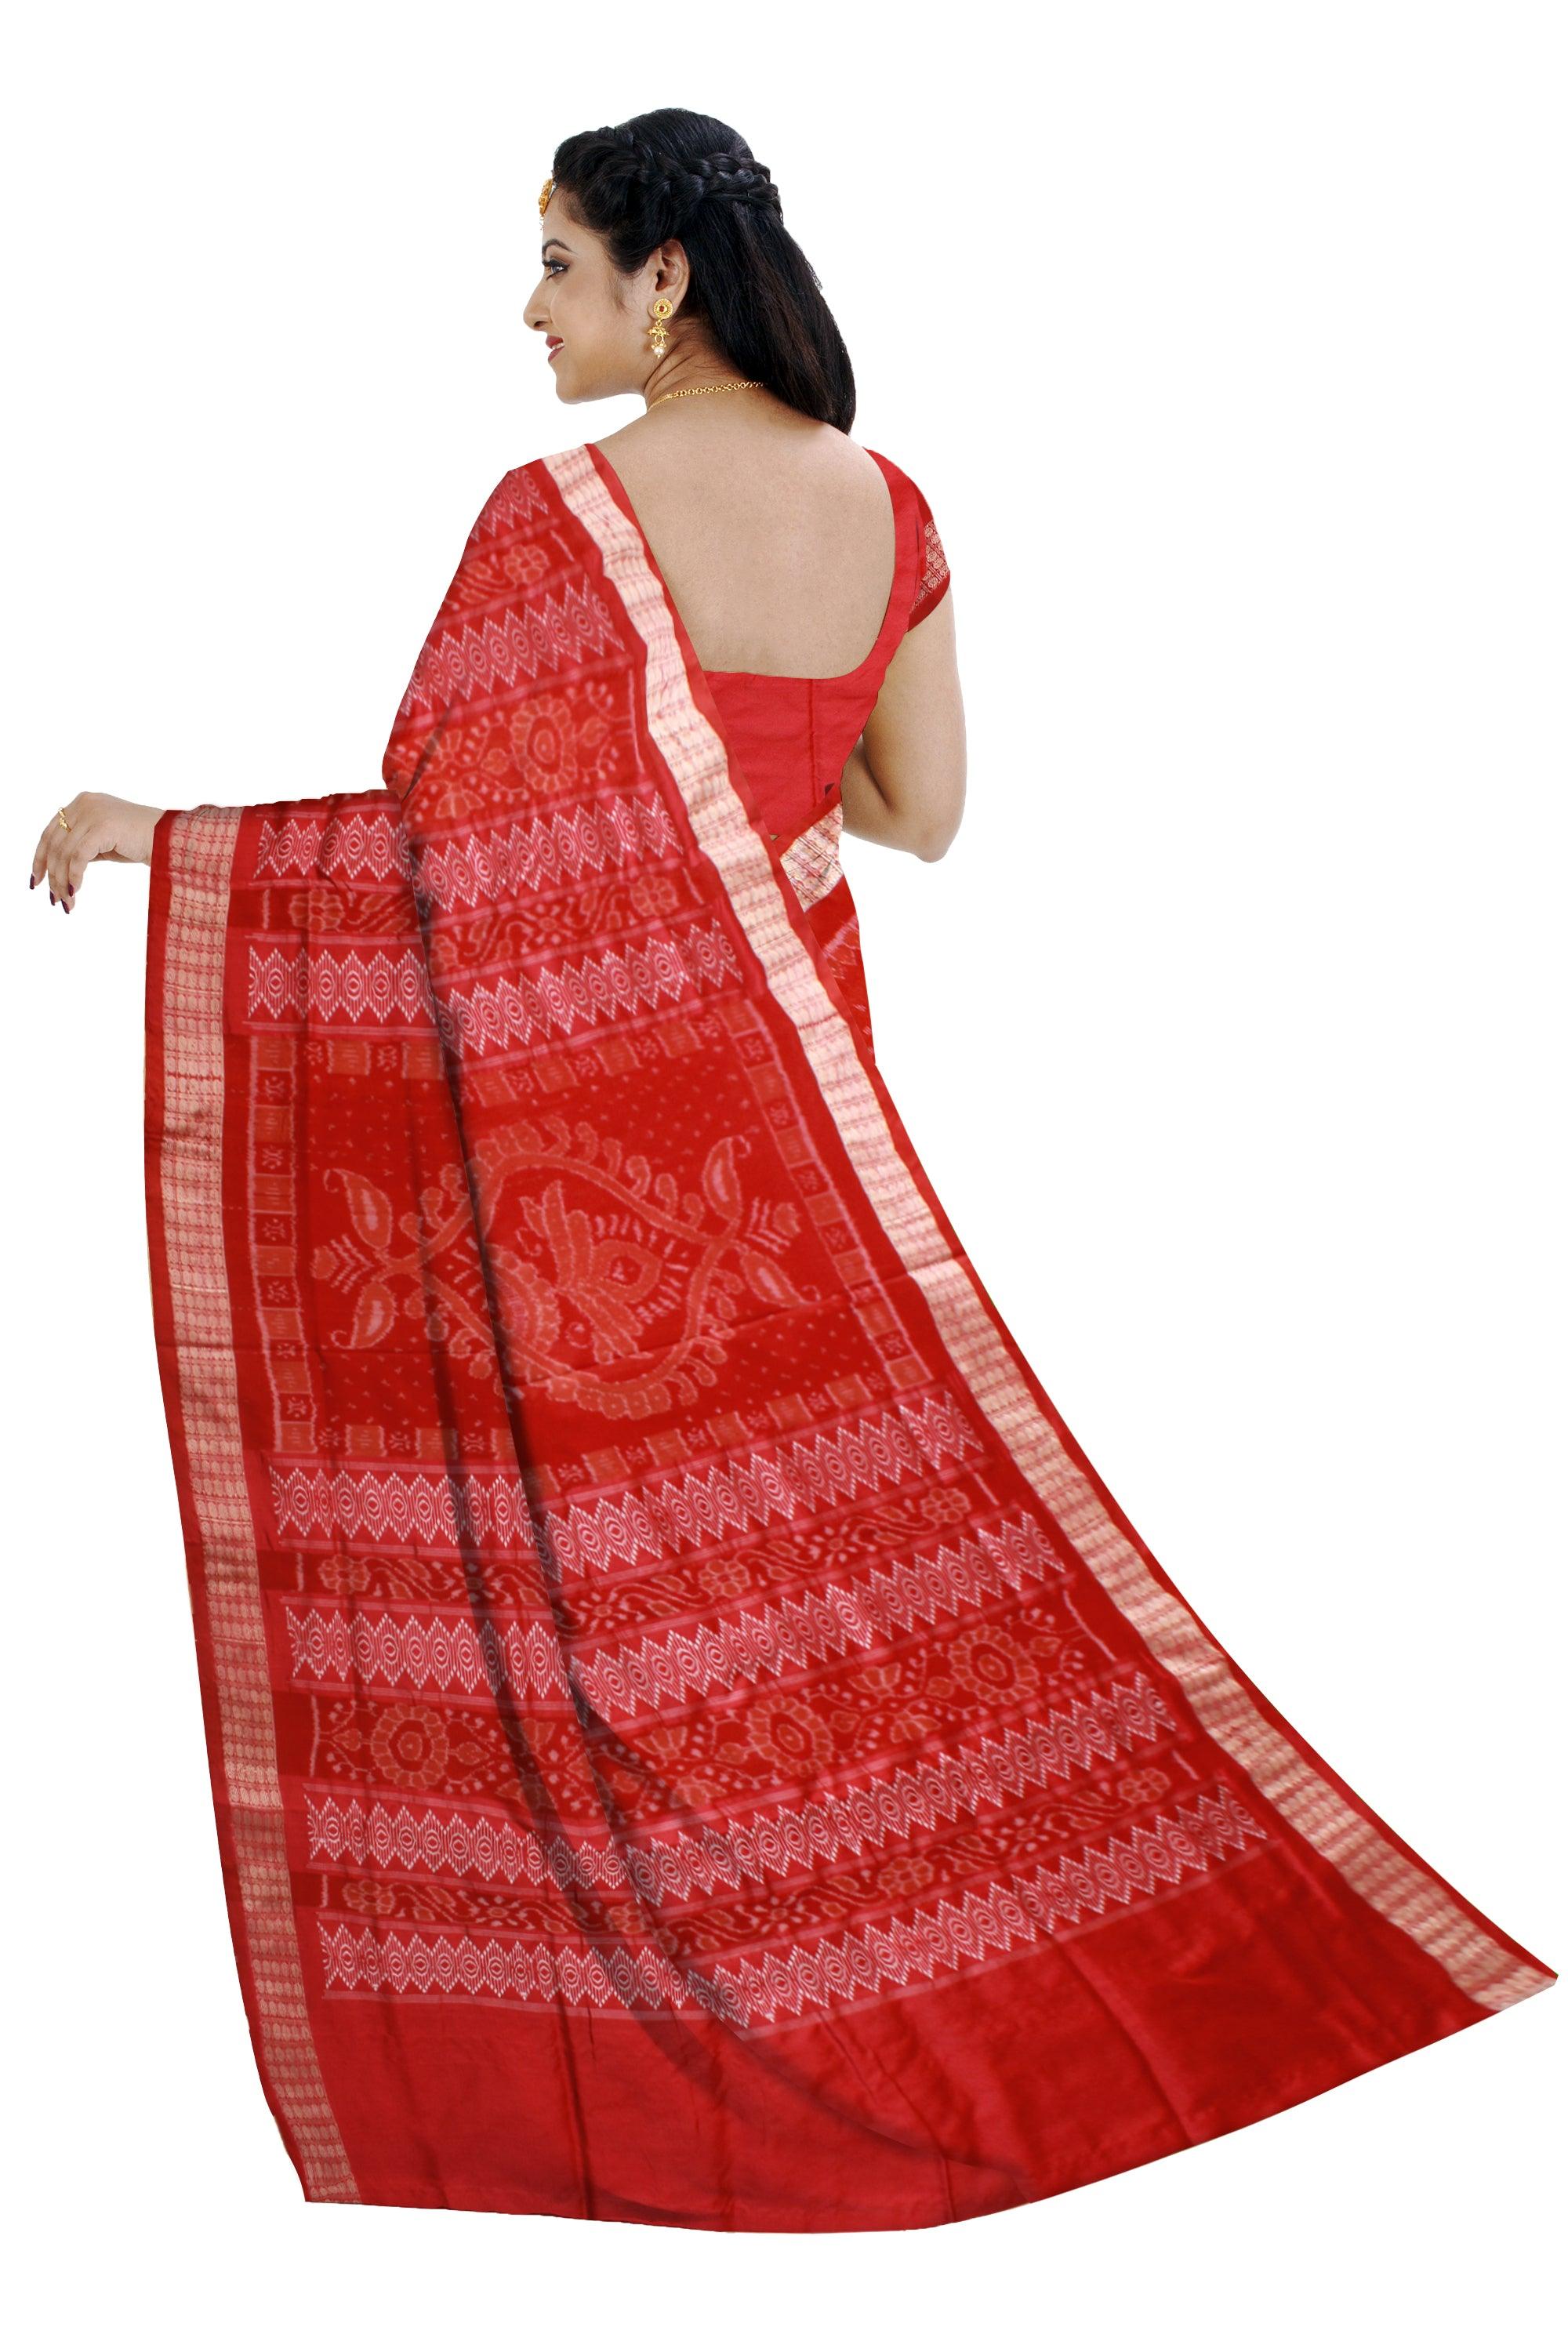 PEACOCK PATTERN BOMKEI PATA SAREE IN YELLOW AND RED COLOR BASE, WITH BLOUSE PIECE. - Koshali Arts & Crafts Enterprise